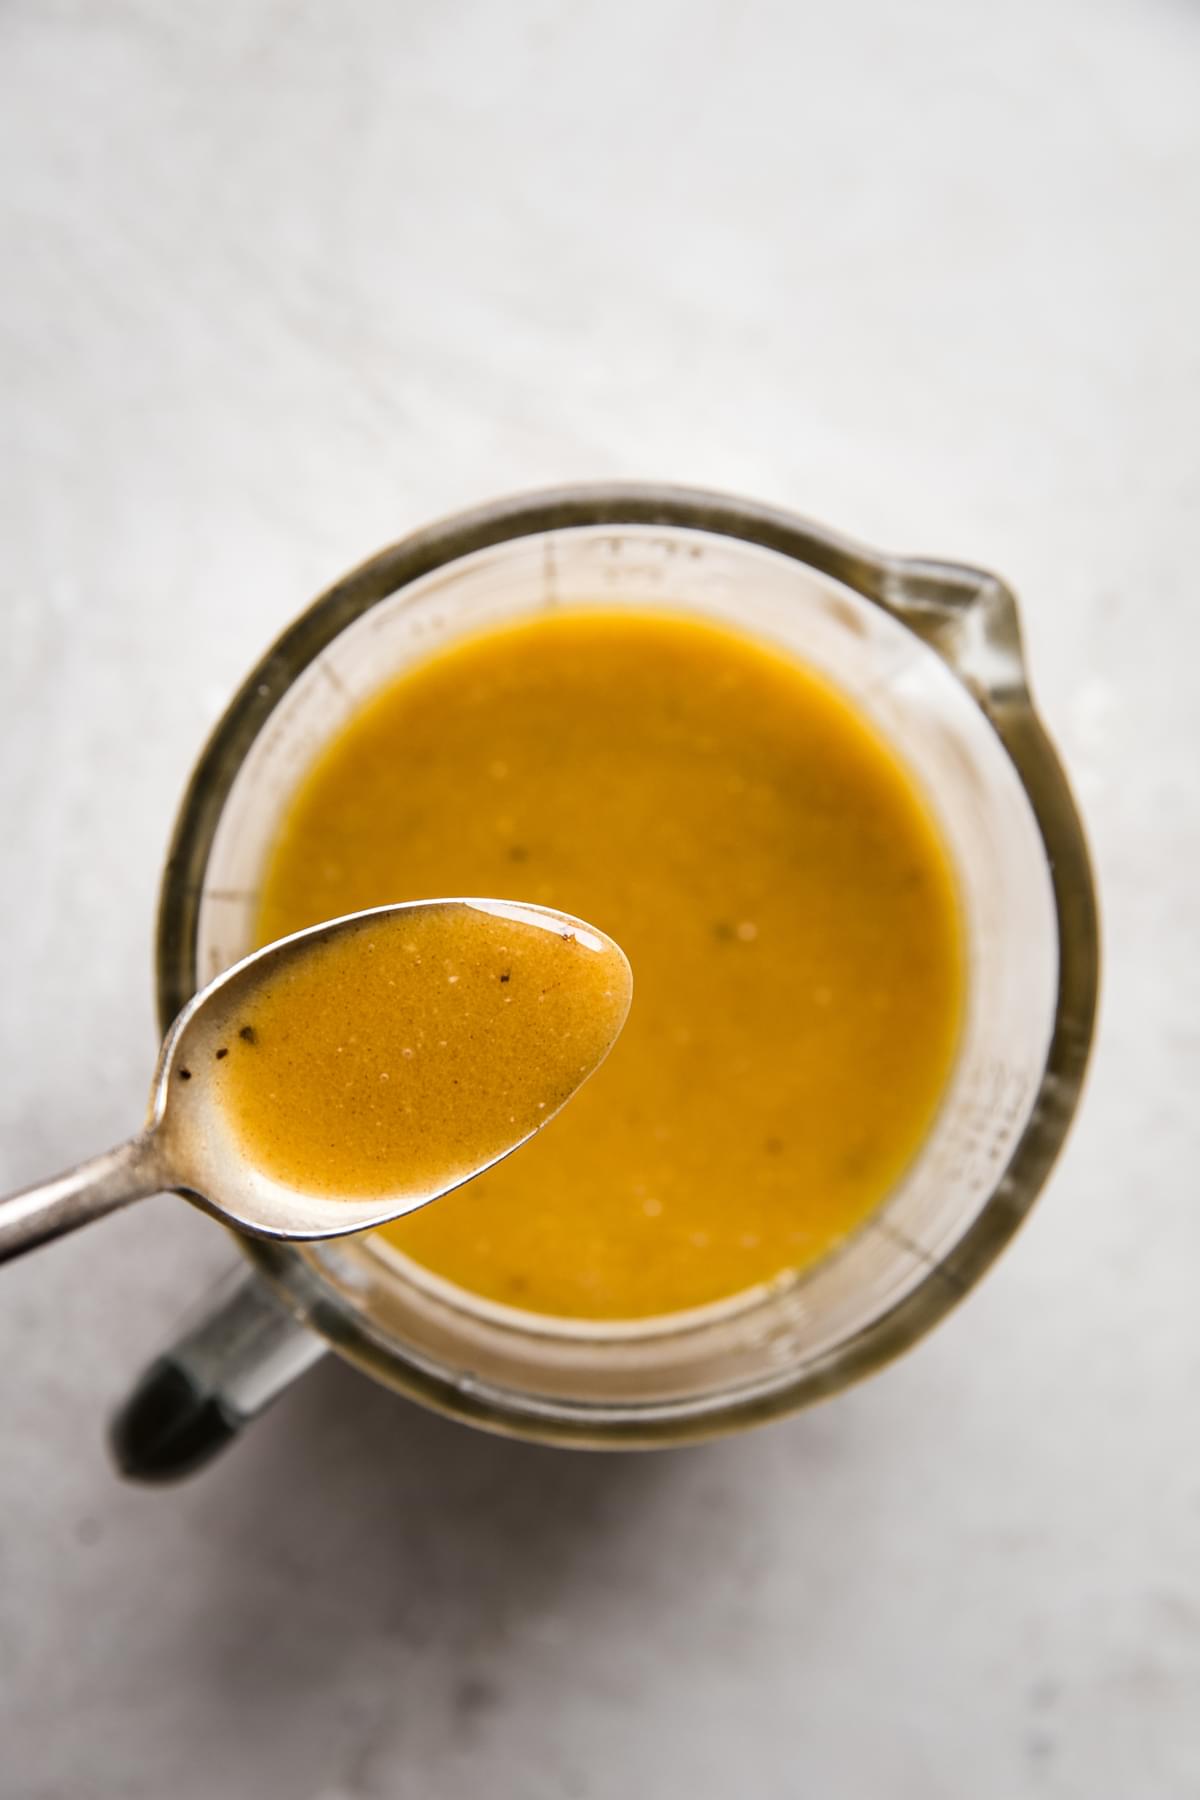 Dressing made with Olive oil, Apple cider, Apple cider vinegar, Mayonnaise, Honey and Cinnamon